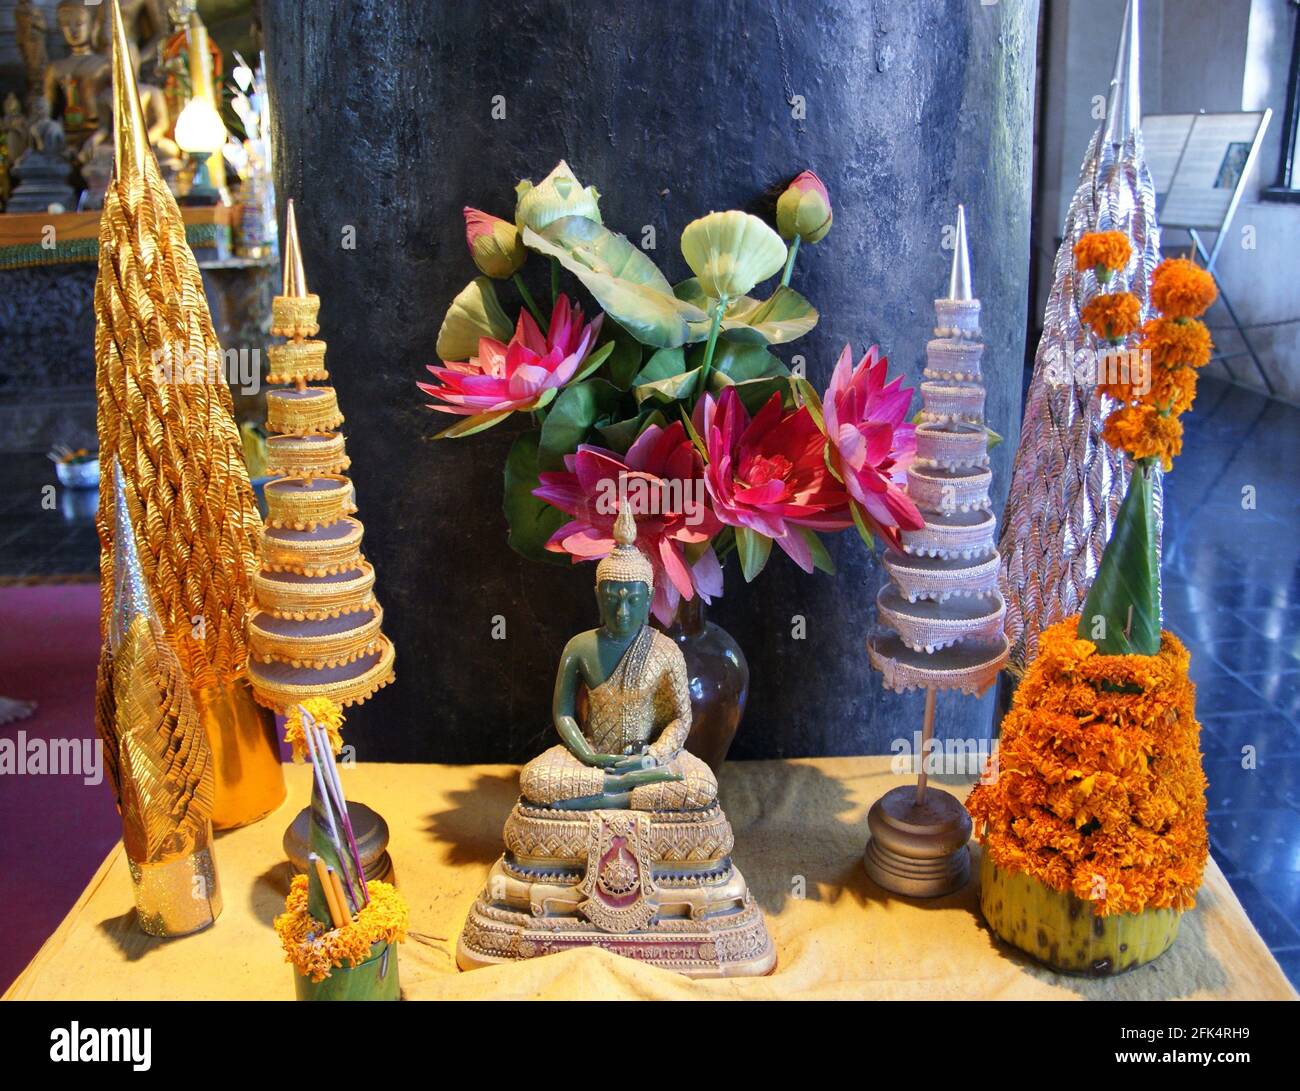 Jade Buddha dressed in gold surrounded by prang shaped decorations and lotus blossoms. Stock Photo